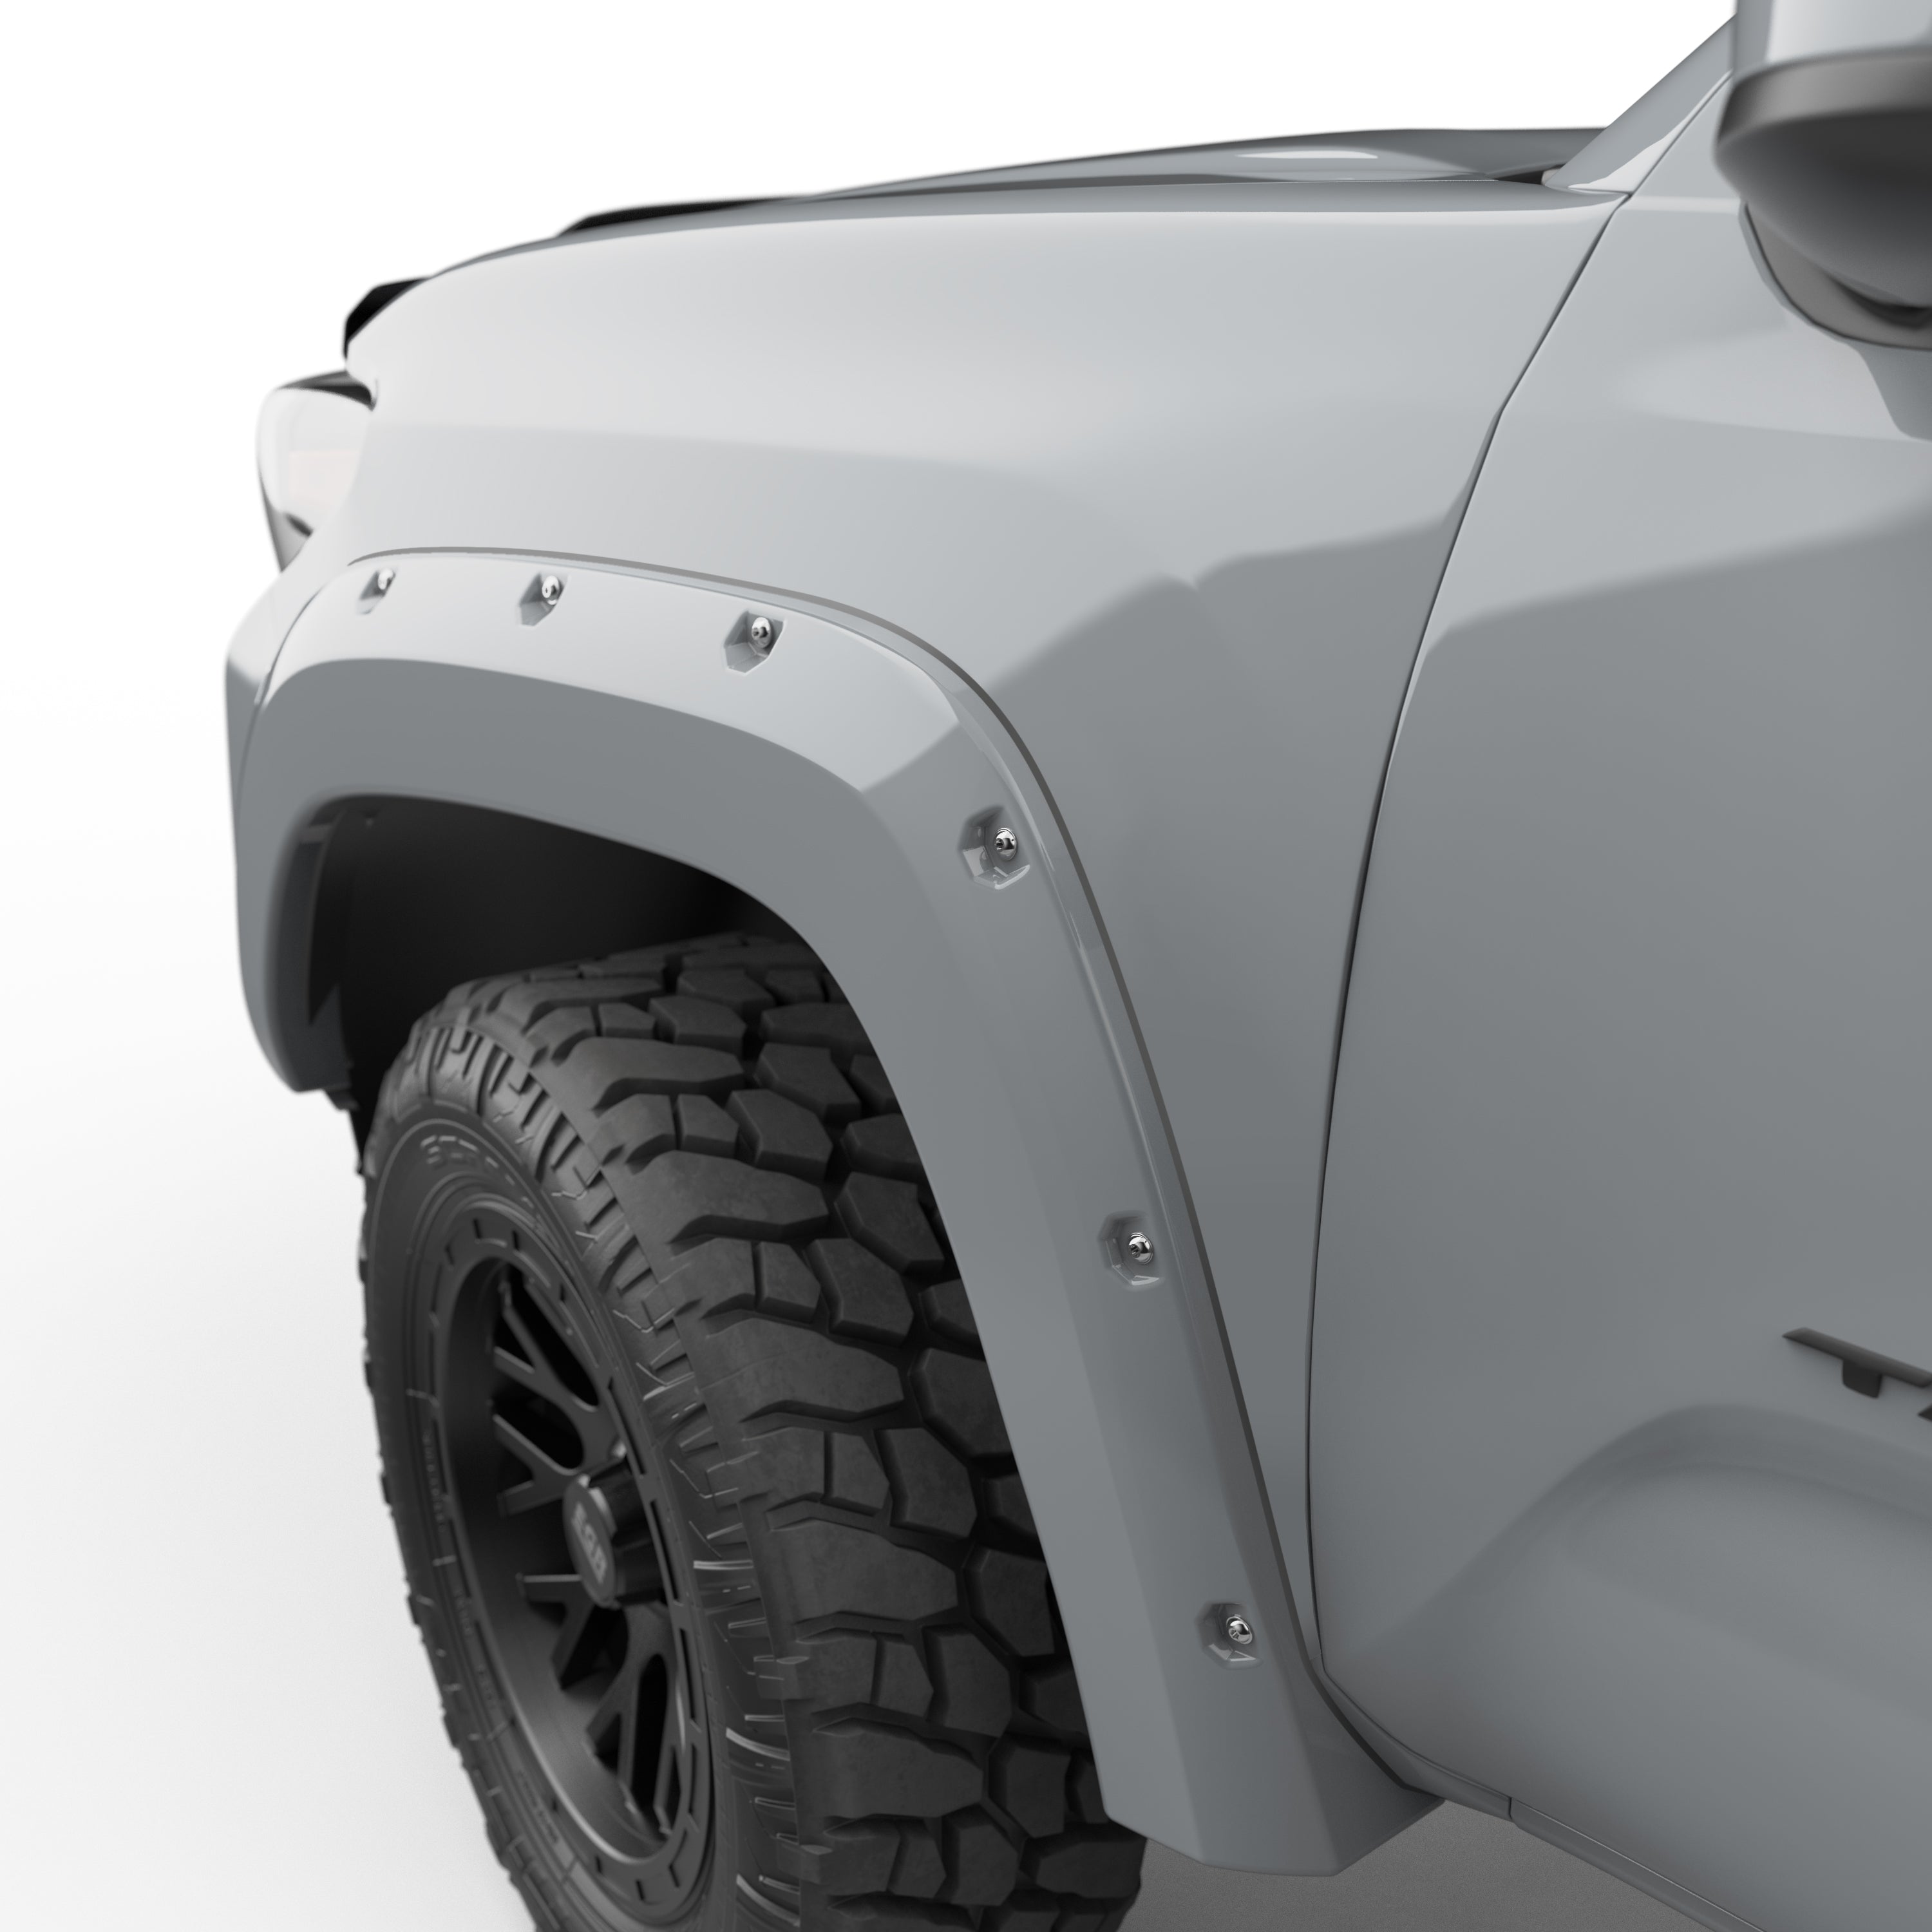 EGR 2016-2023 Toyota Tacoma 4 Door Extended Cab Crew Cab Pickup Traditional bolt-on look Fender Flares set of 4 Paint to Code Grey 795084-1G3